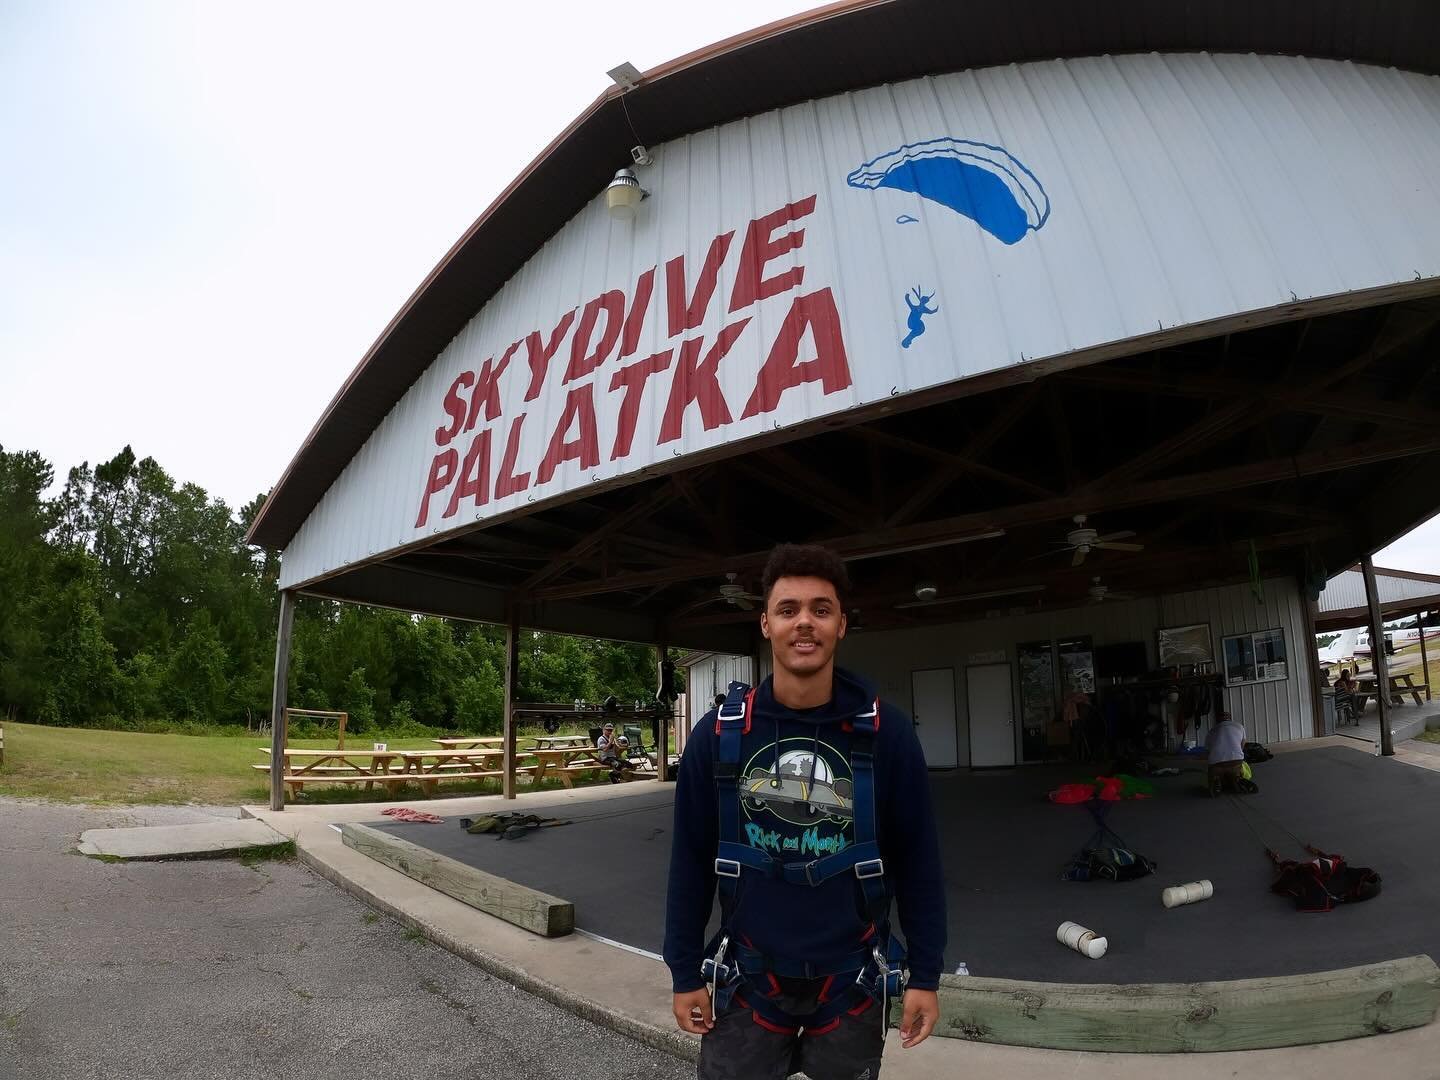 When turning 18 you unlock a world of exciting new possibilities - from buying a lottery ticket, to getting that cool tattoo you&rsquo;ve always wanted. But now, you can add a thrilling skydiving experience to the list! 

Noah recently celebrated his